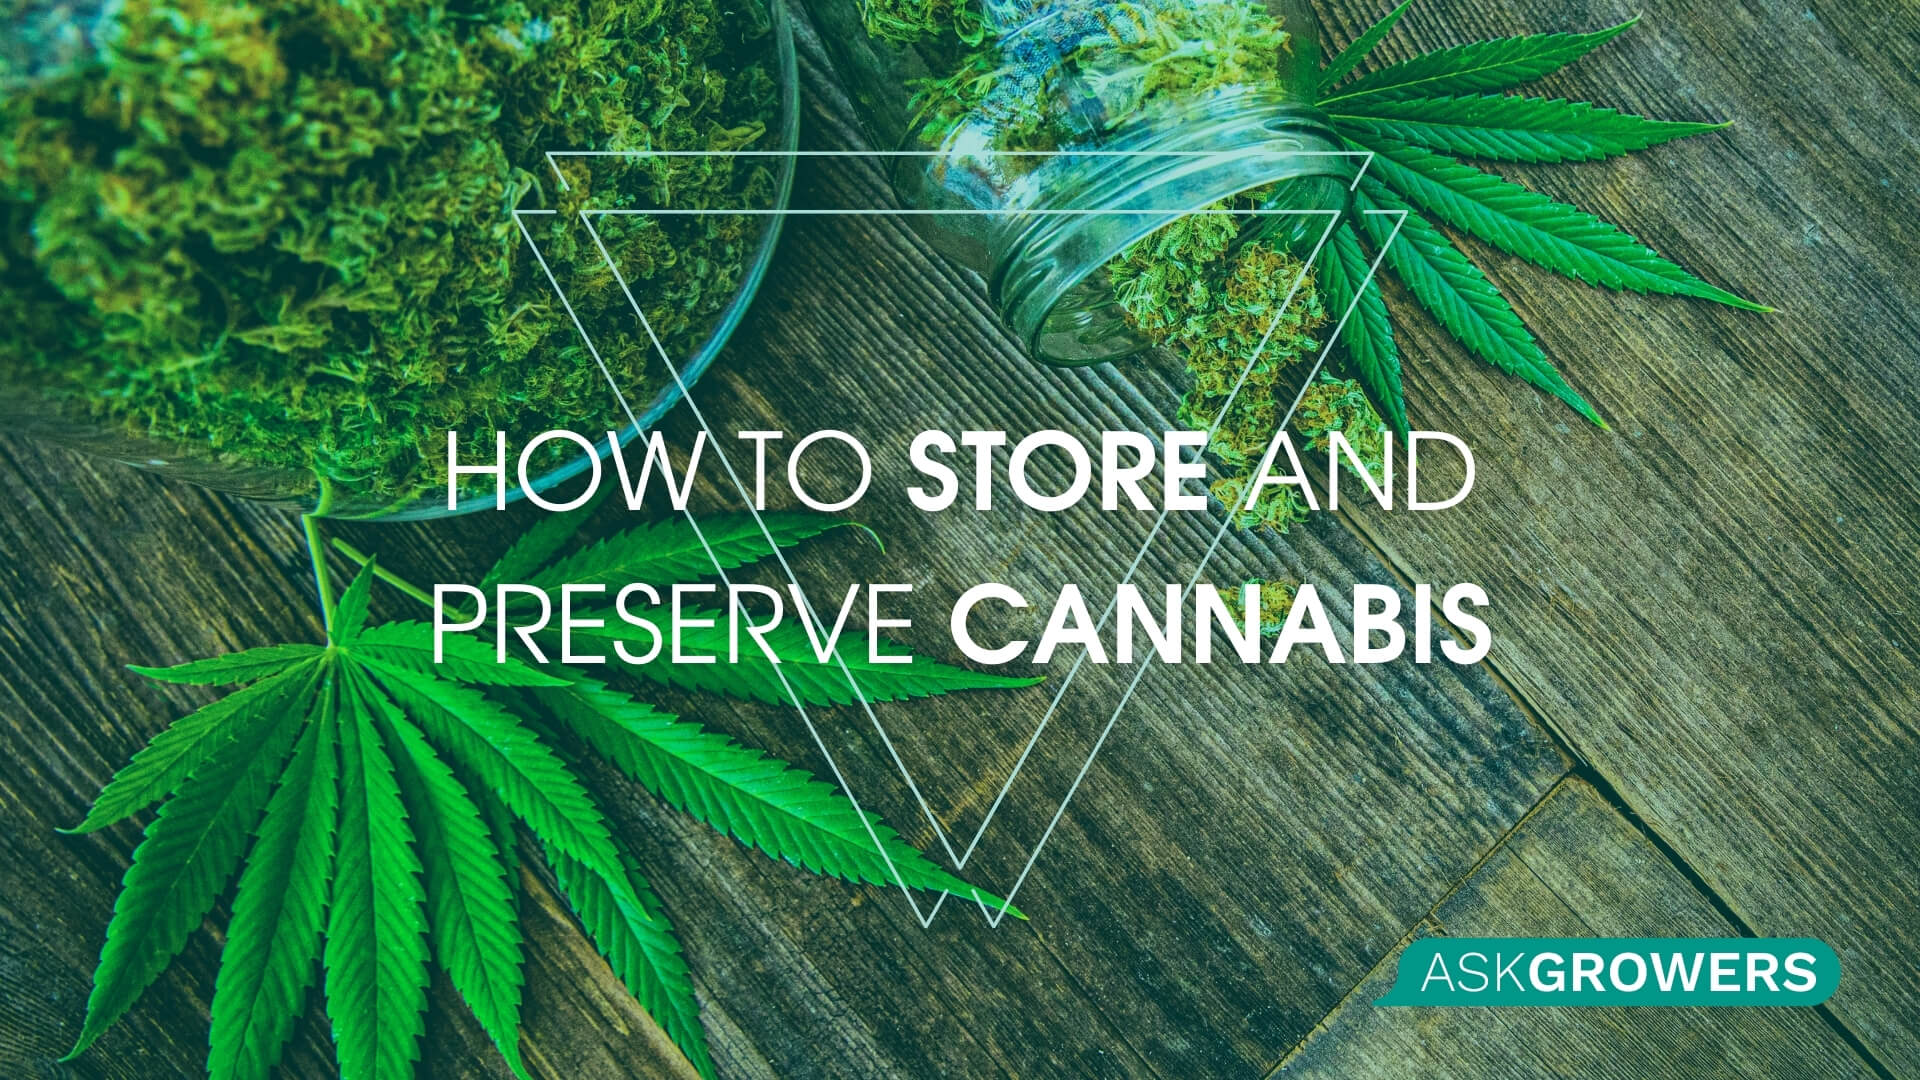 How to Store and Preserve Cannabis